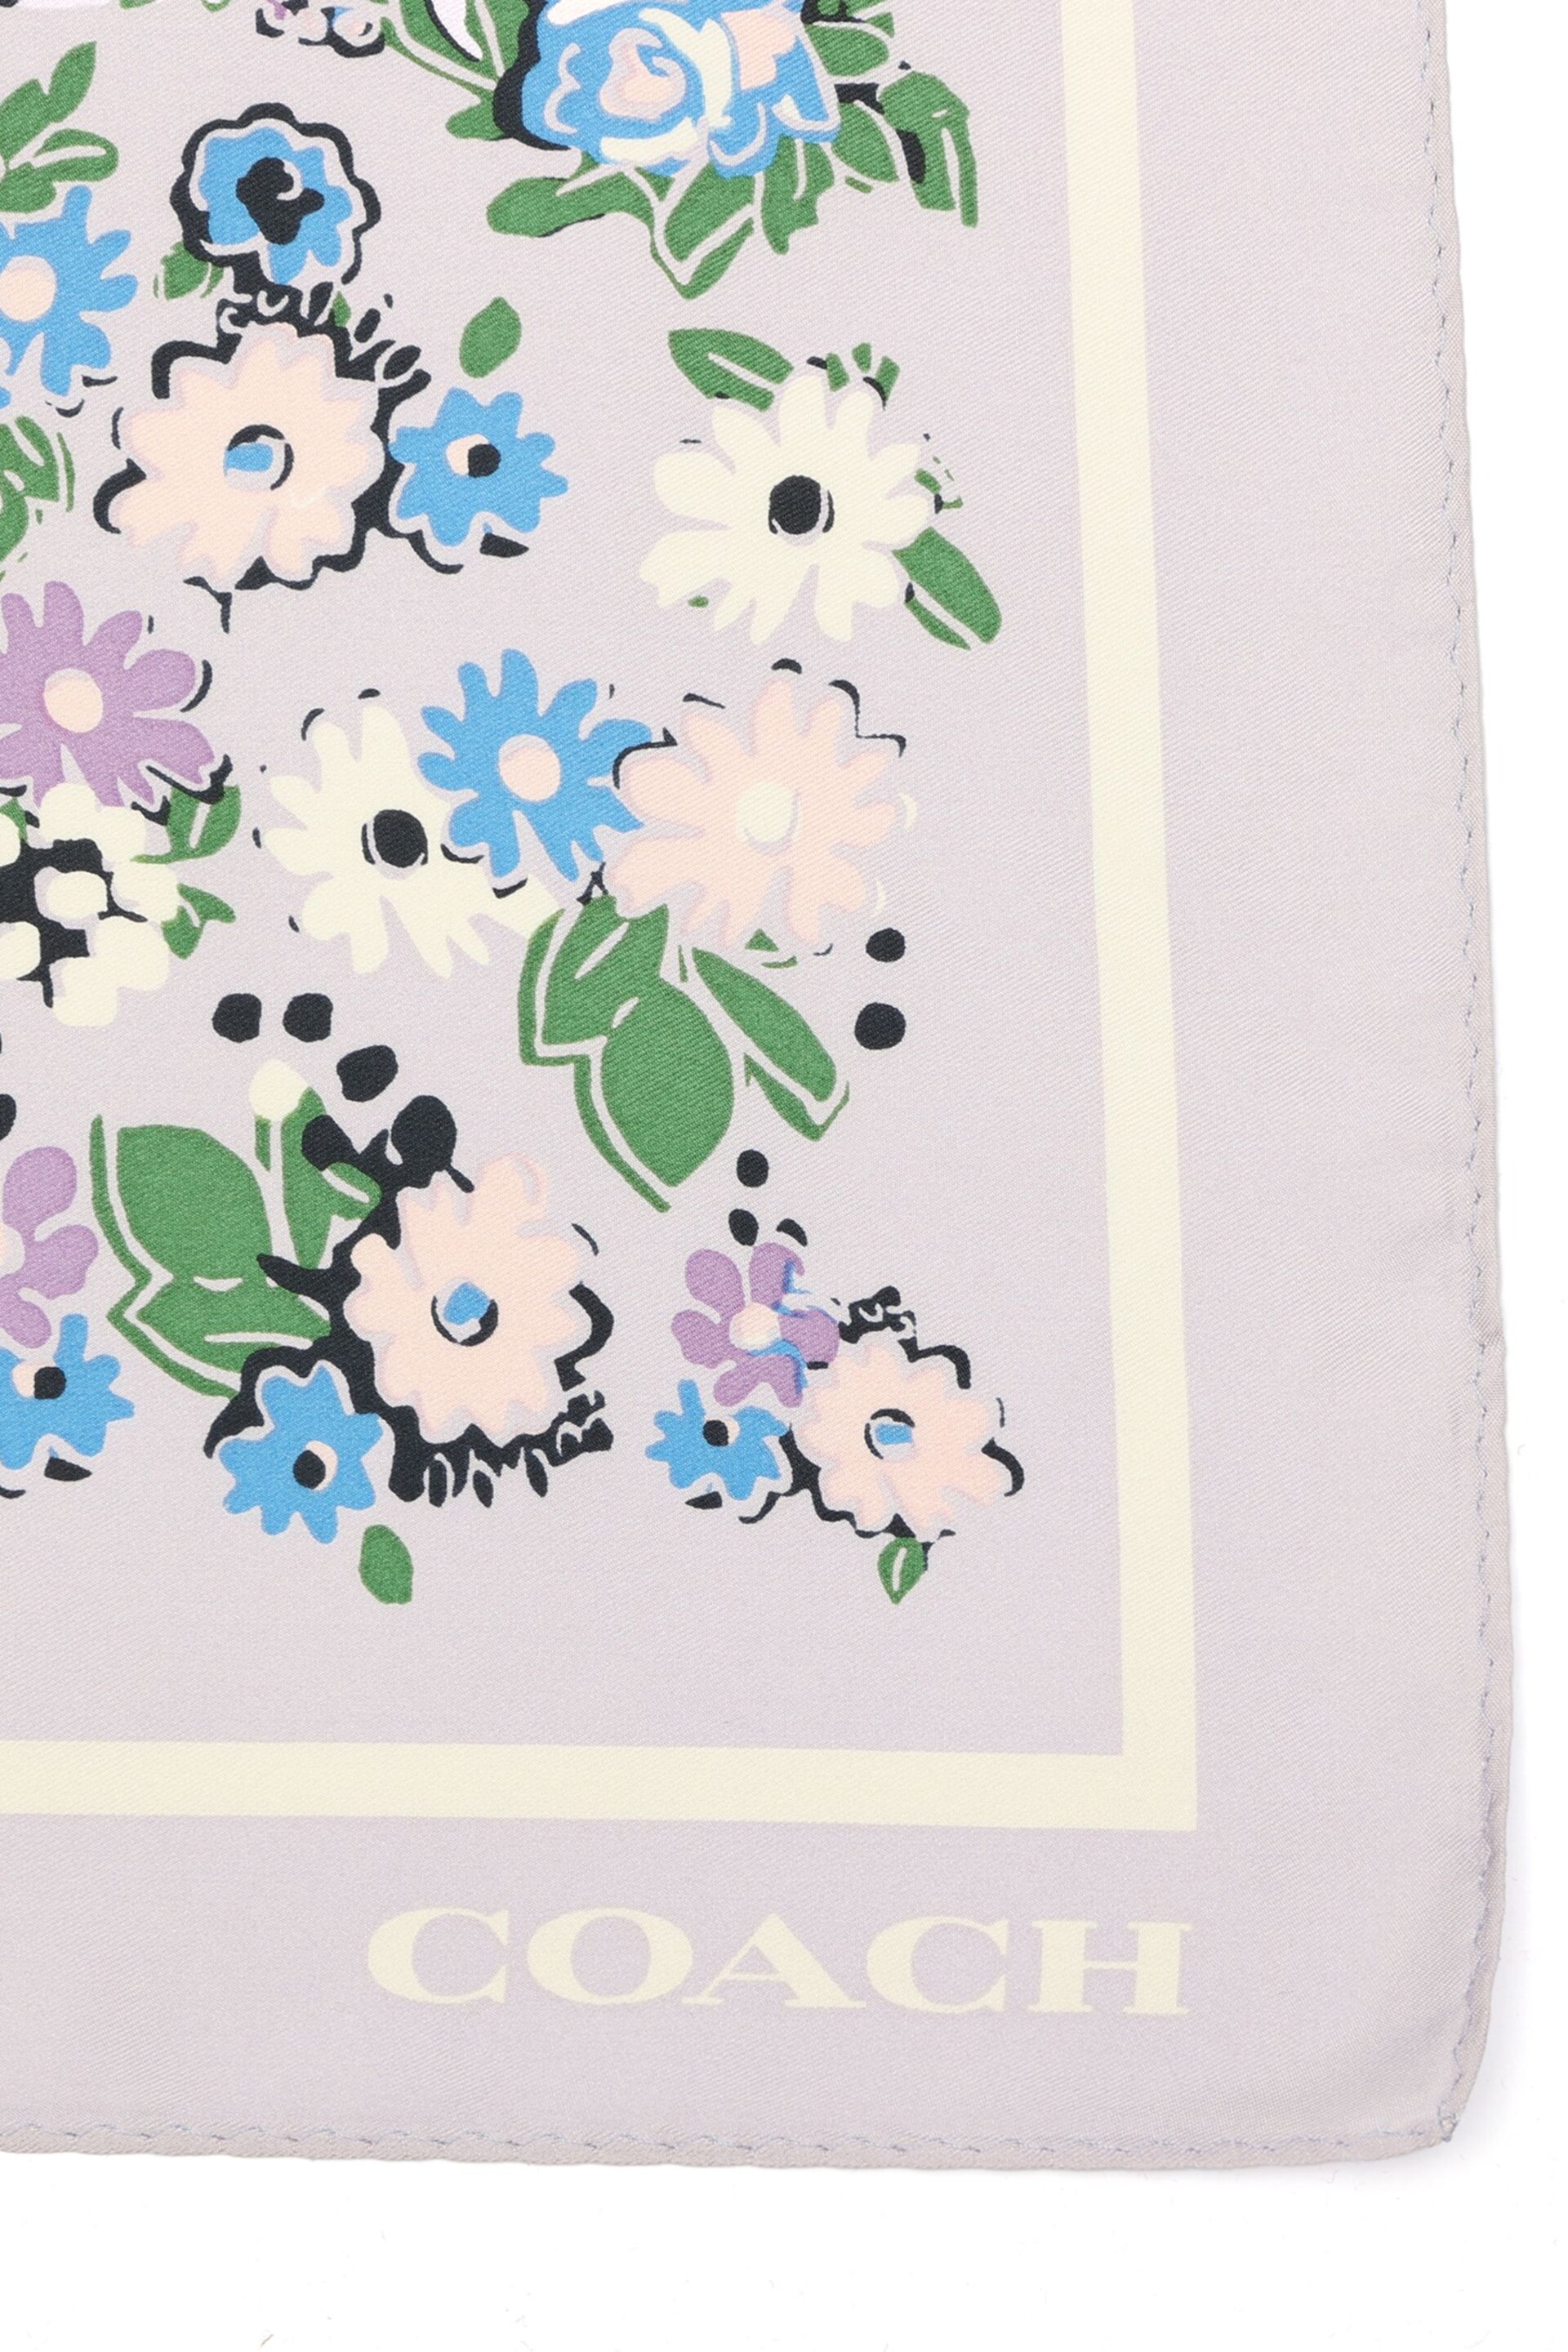 COACH Purple Floral Printed Silk Square Scarve - Image 4 of 4